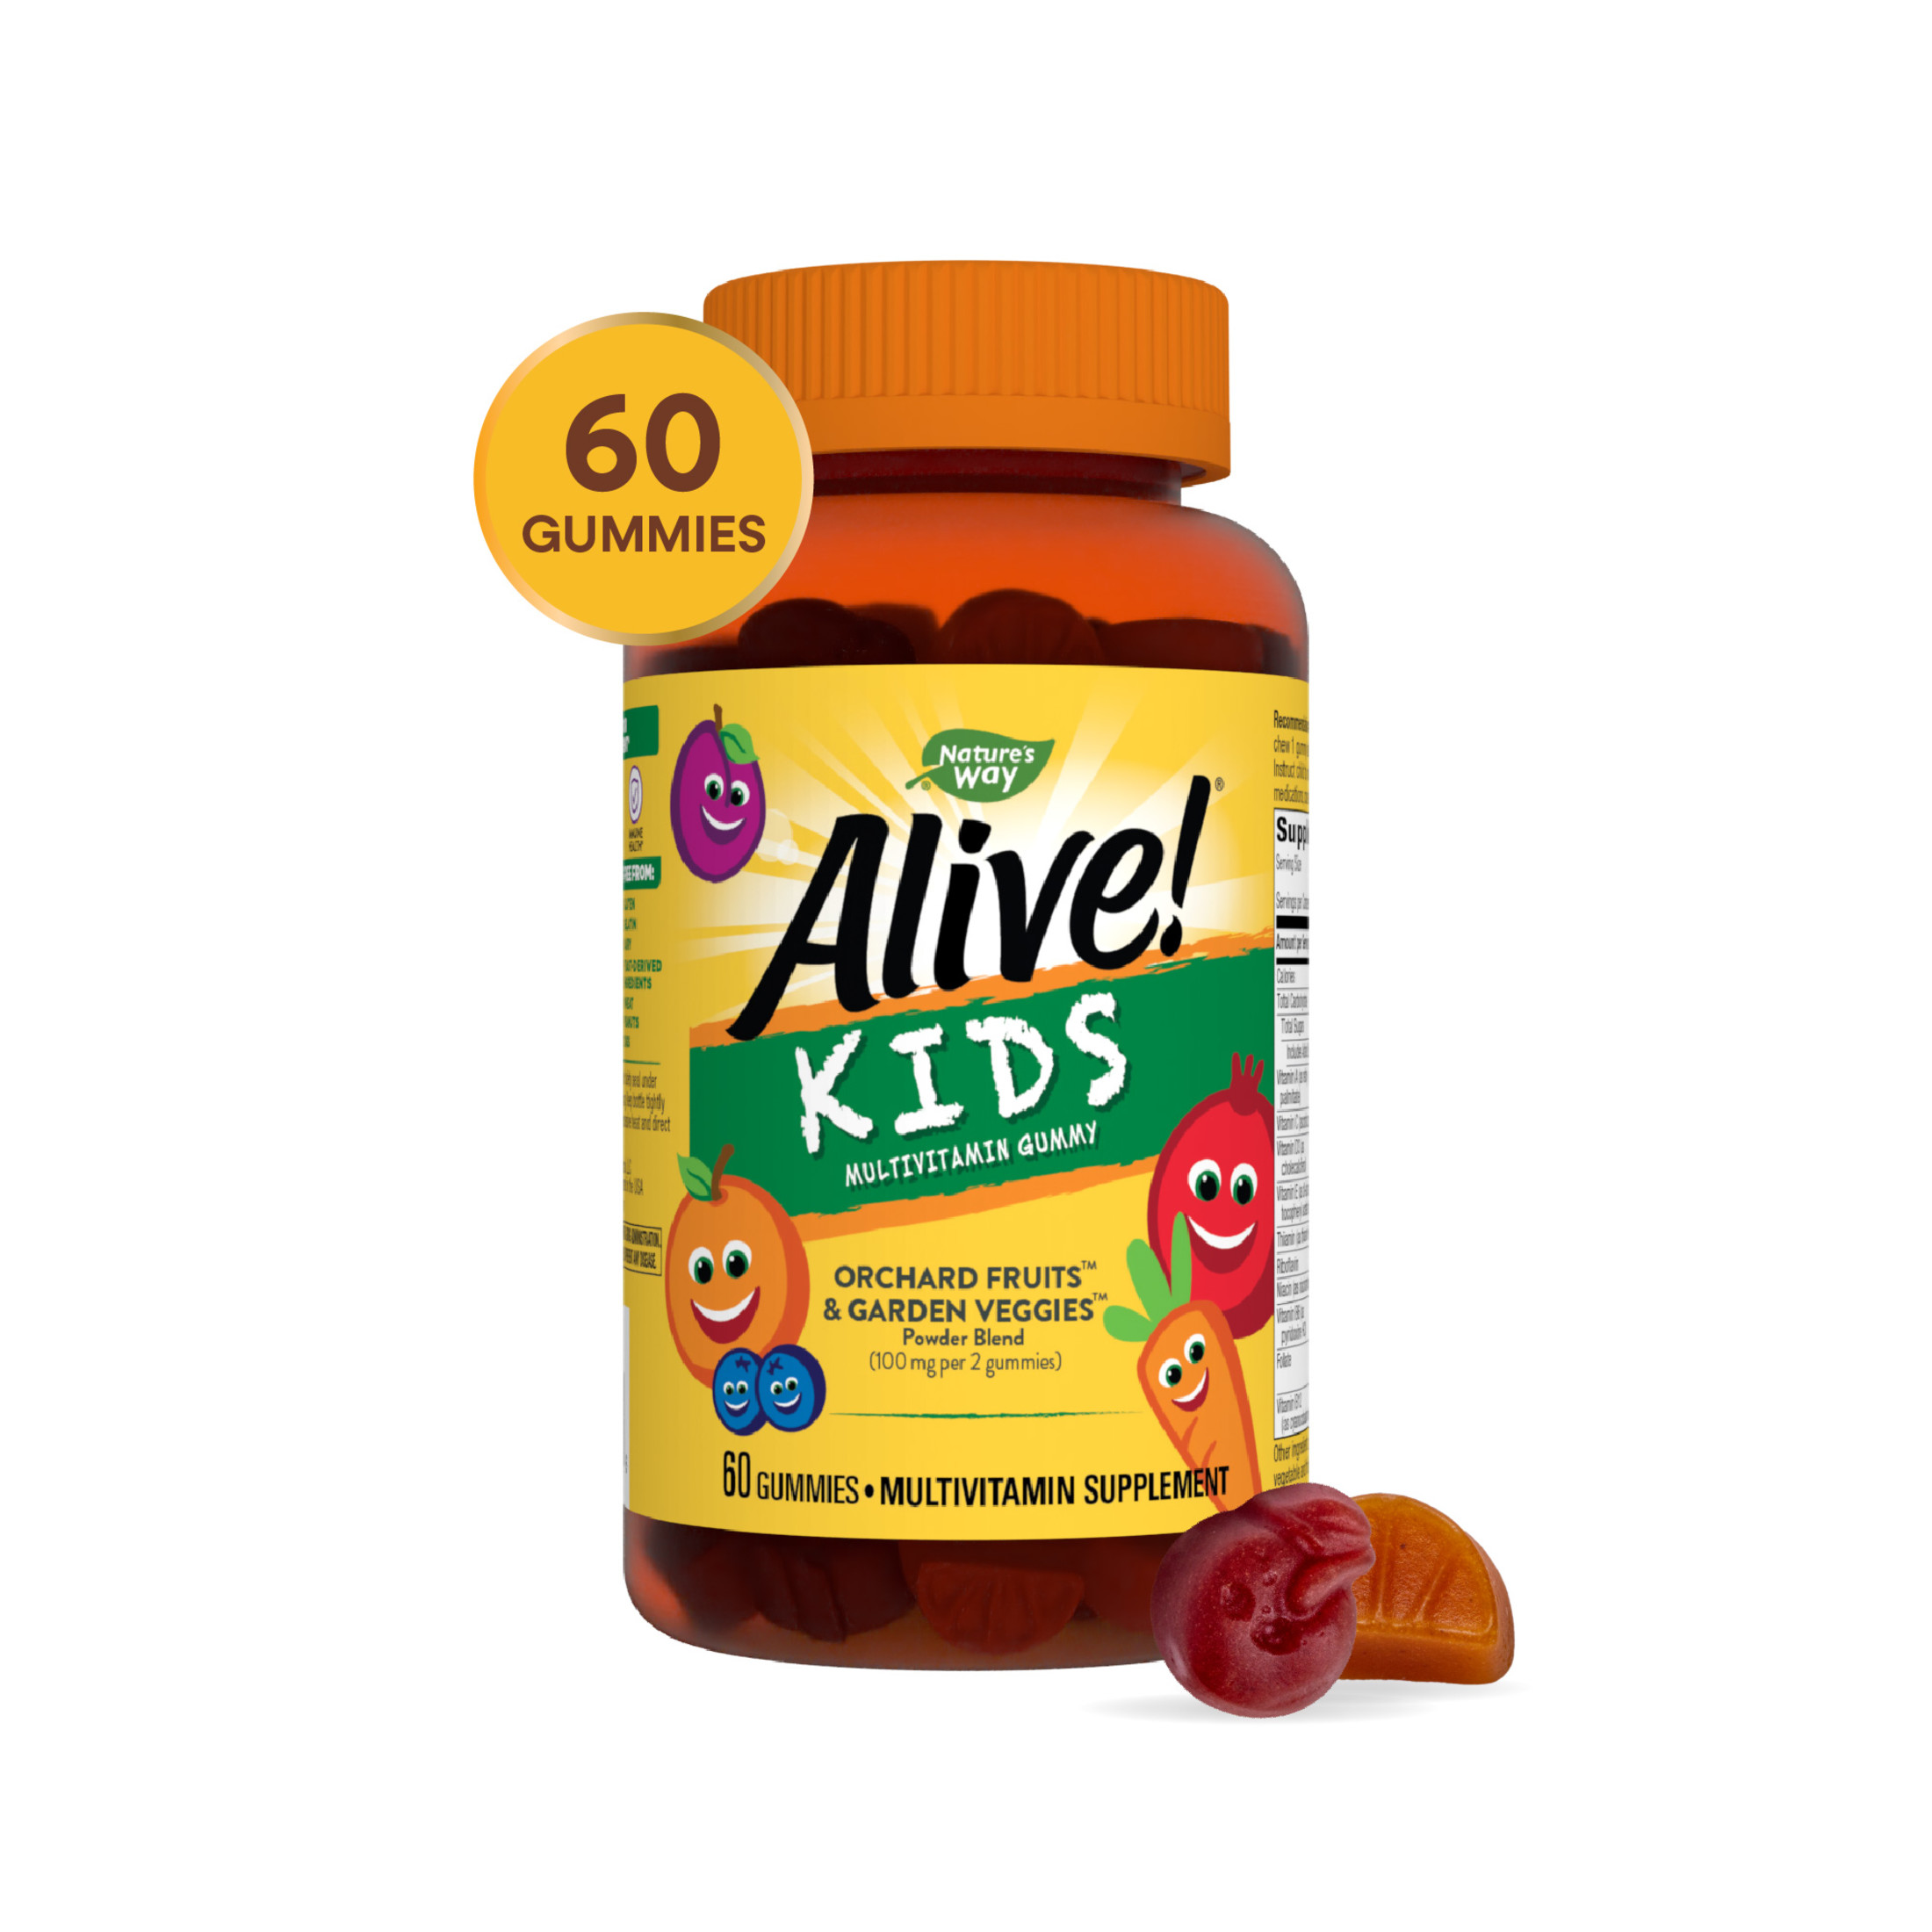 Alive! Kid's Daily Multivitamin Gummies, Supports Growth and Development*, Fruit Flavored, 60 Count - image 5 of 8